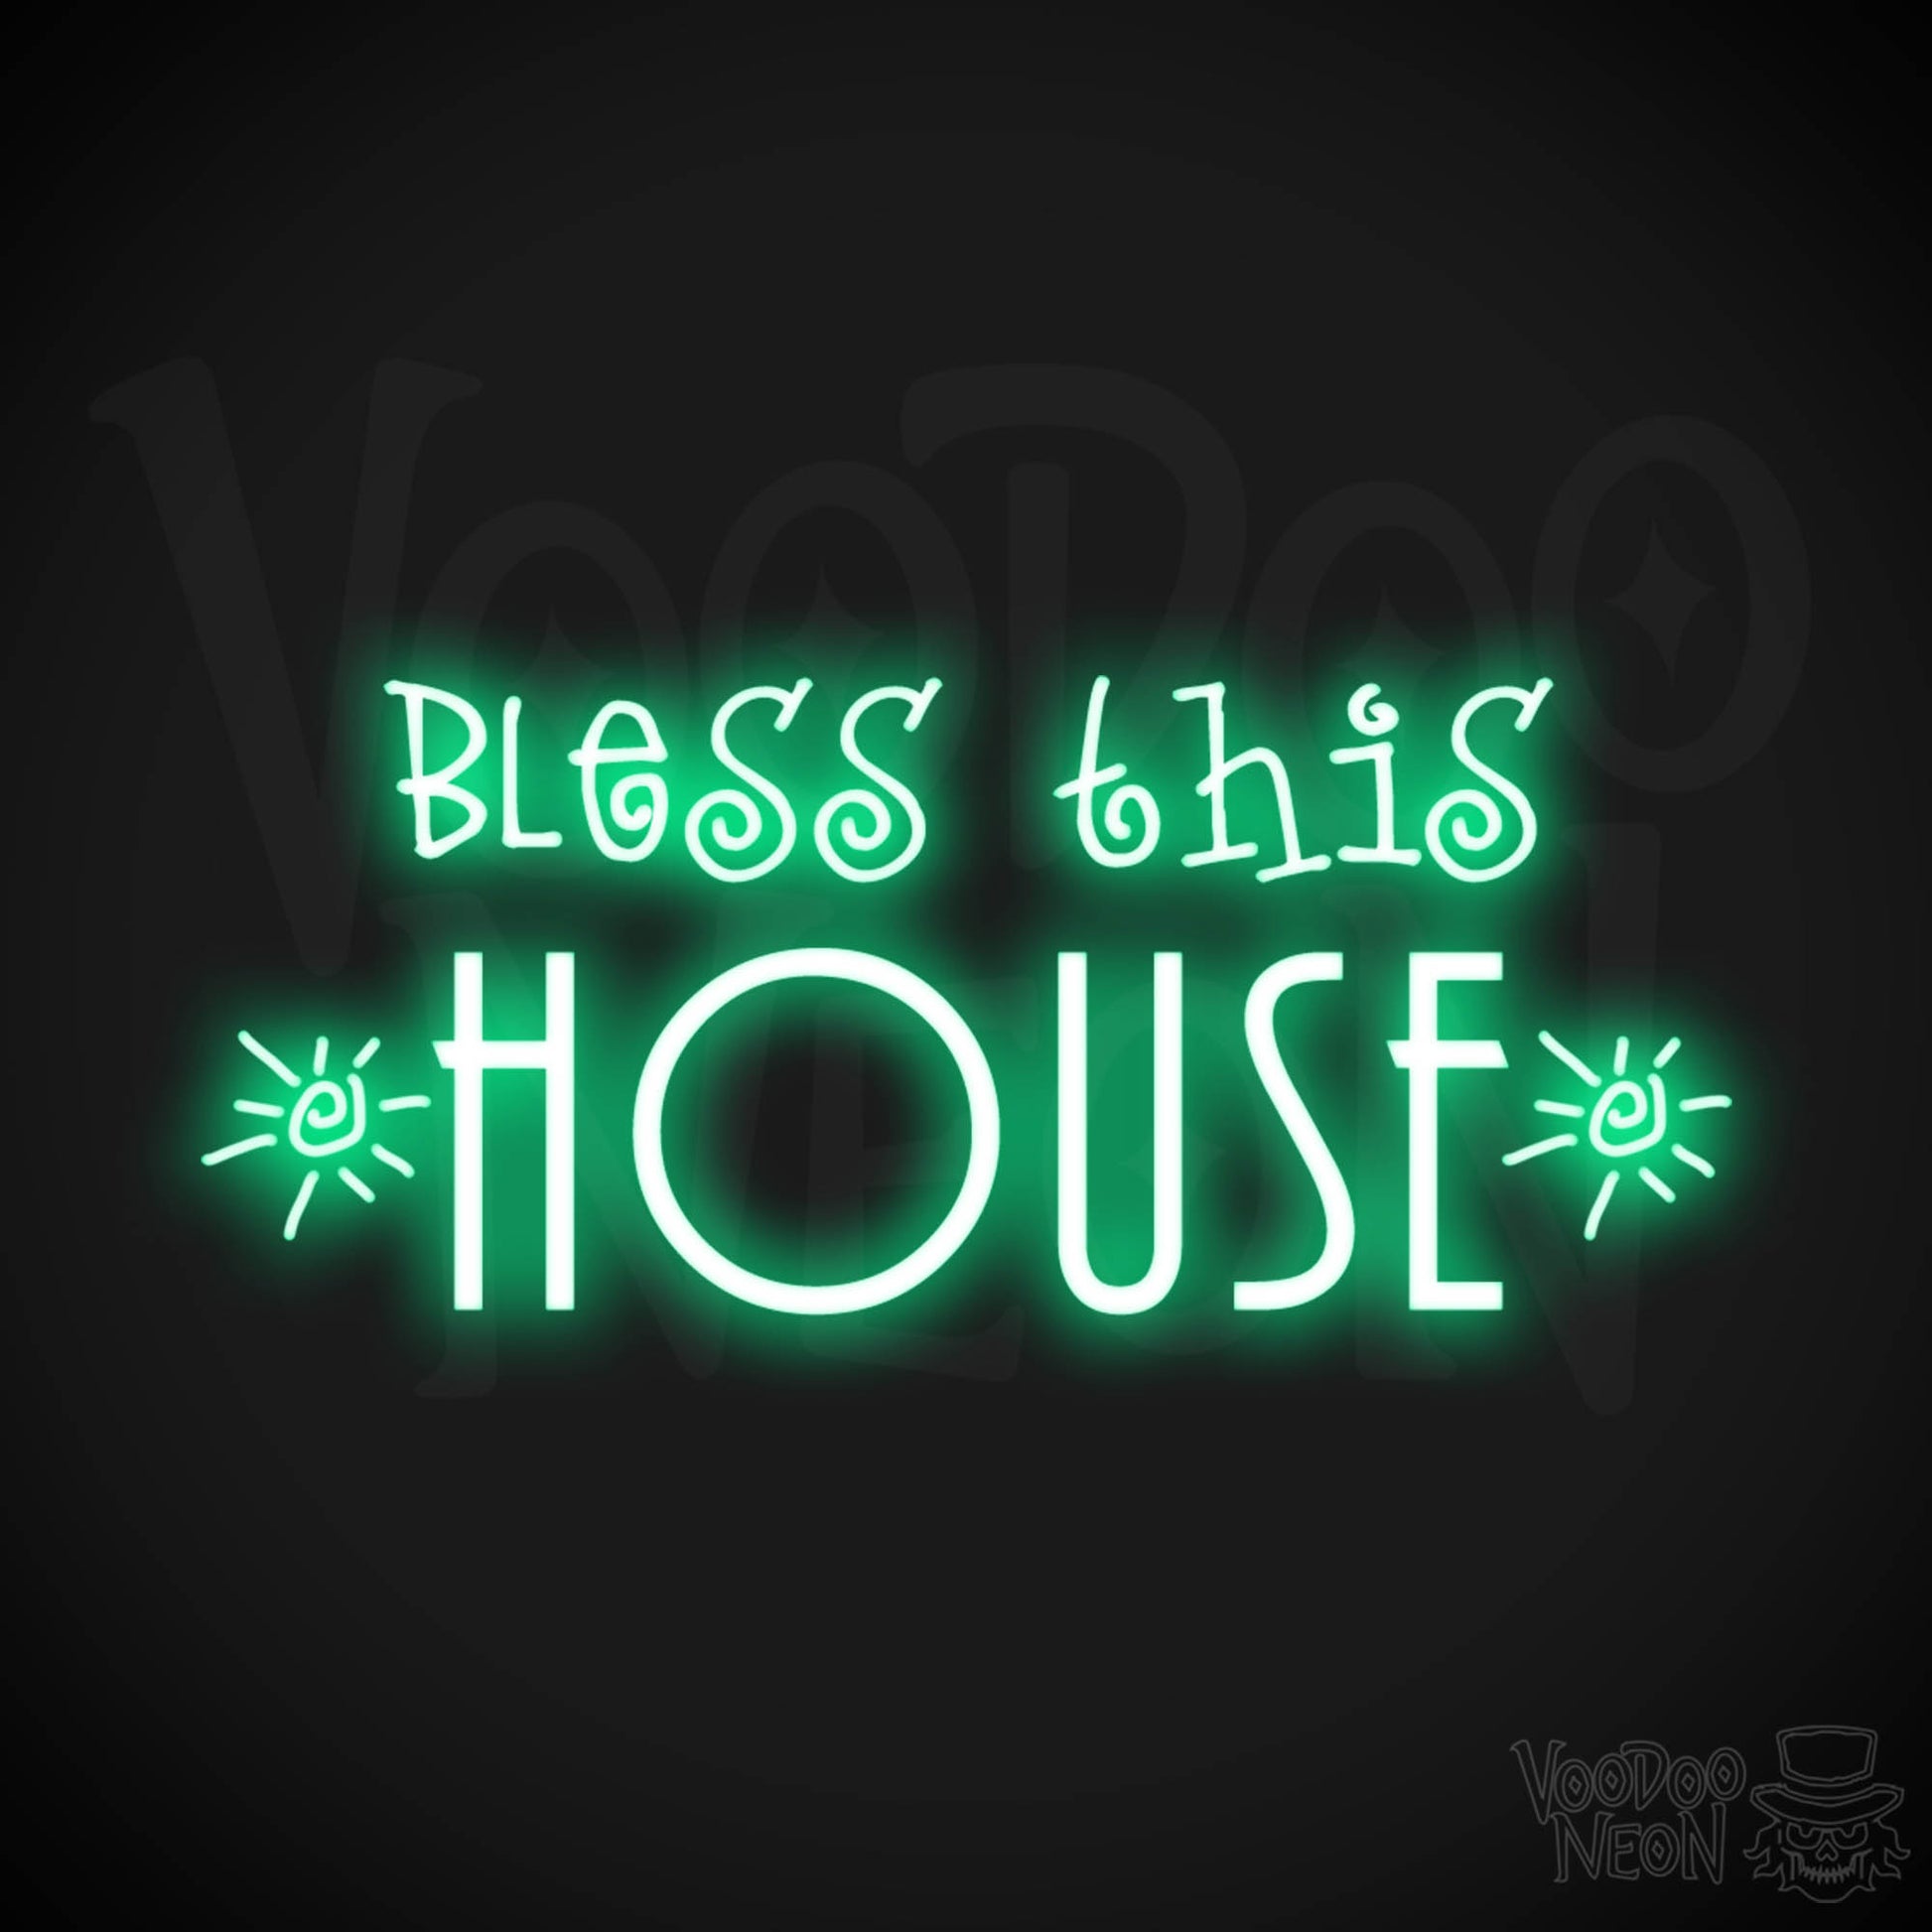 Bless This House Neon Sign - Neon Bless This House Sign - LED Light Up Sign - Color Green